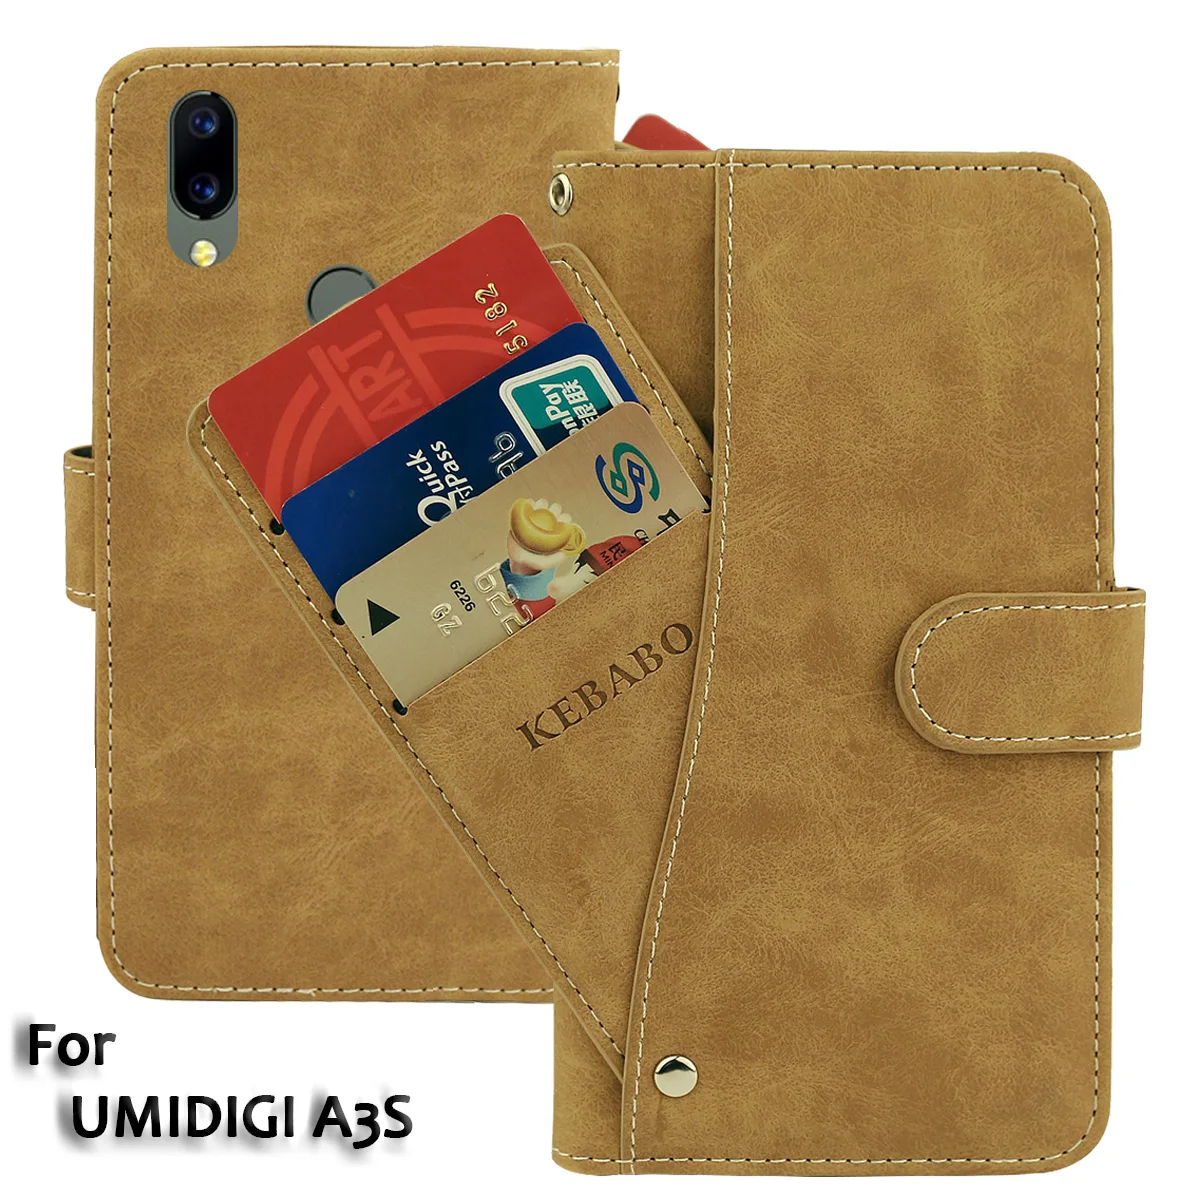 

Vintage Leather Wallet UMIDIGI A3S Case 5.7" Flip Luxury Card Slots Cover Magnet Stand Phone Protective Bags